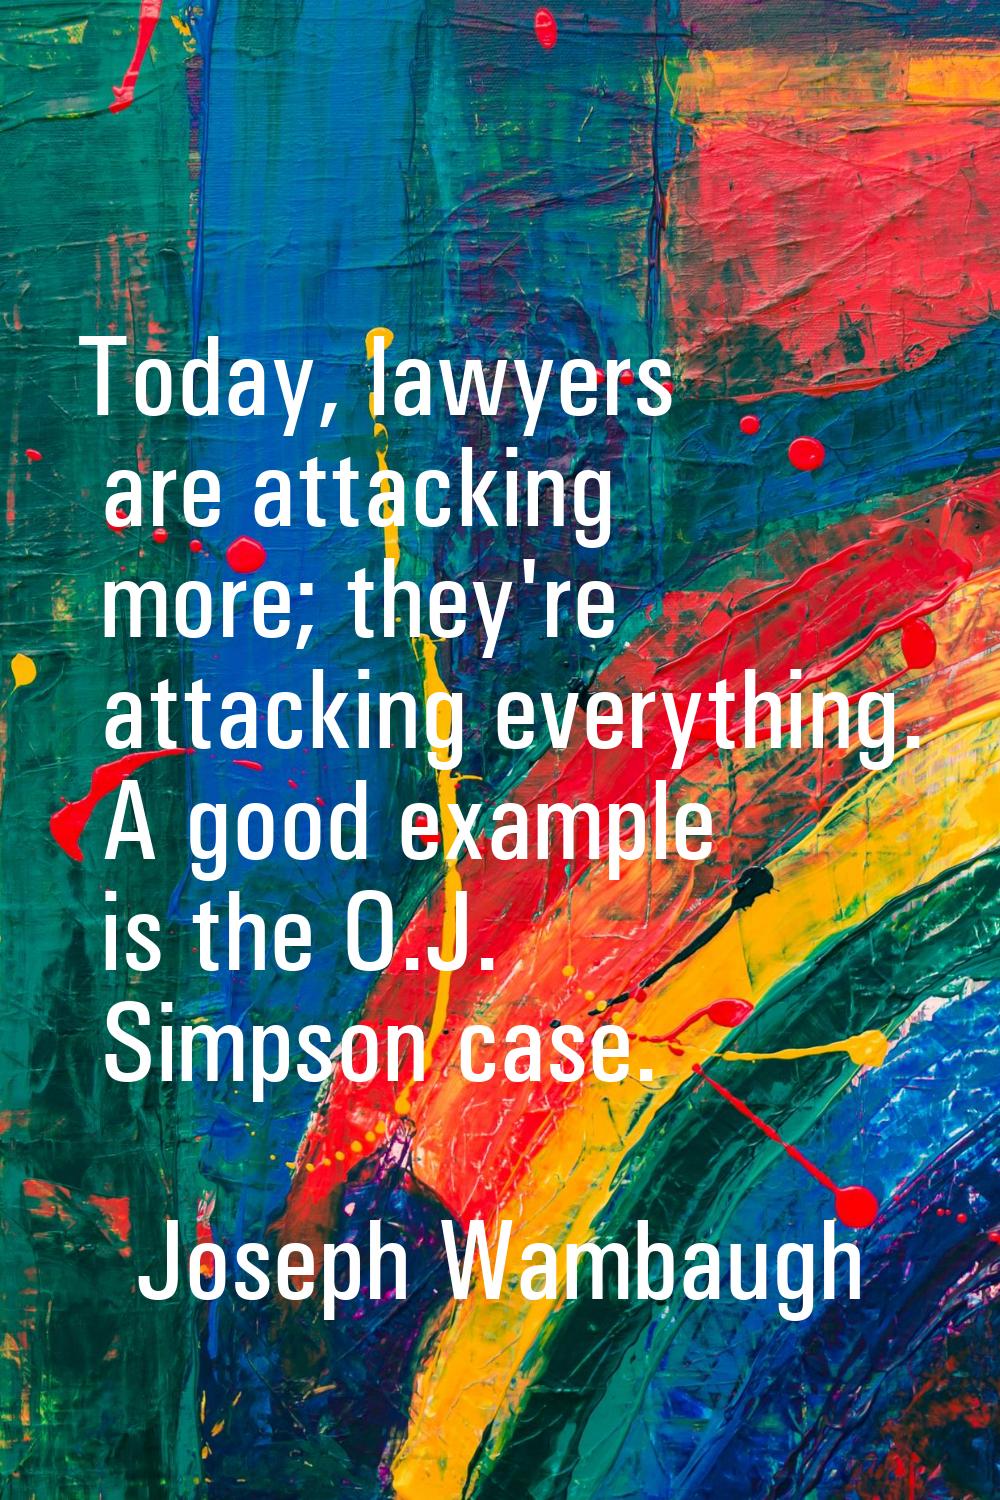 Today, lawyers are attacking more; they're attacking everything. A good example is the O.J. Simpson